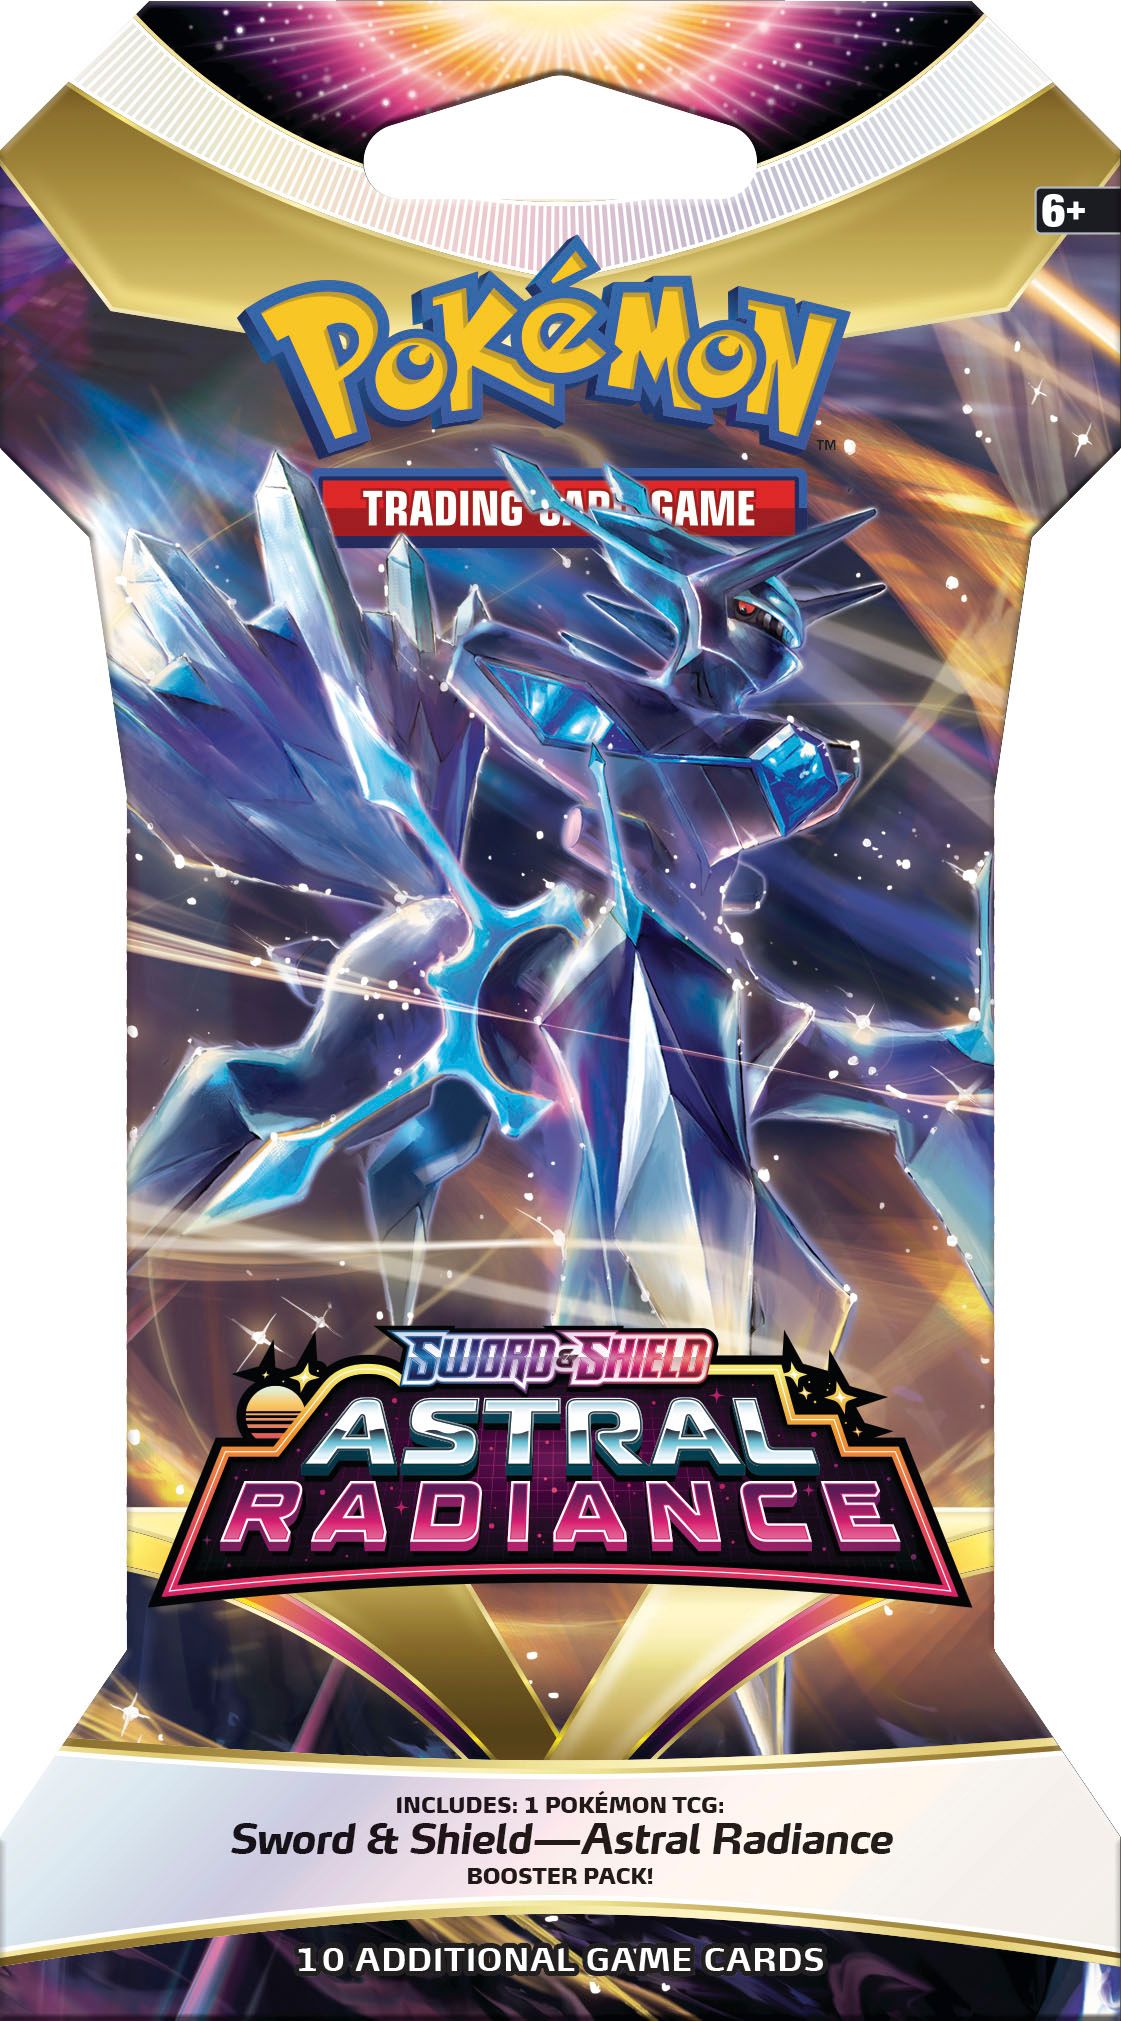 Pokémon Trading Card Game: Astral Radiance Sleeved Boosters Styles May Vary 181-87024 - Best Buy | Best Buy U.S.